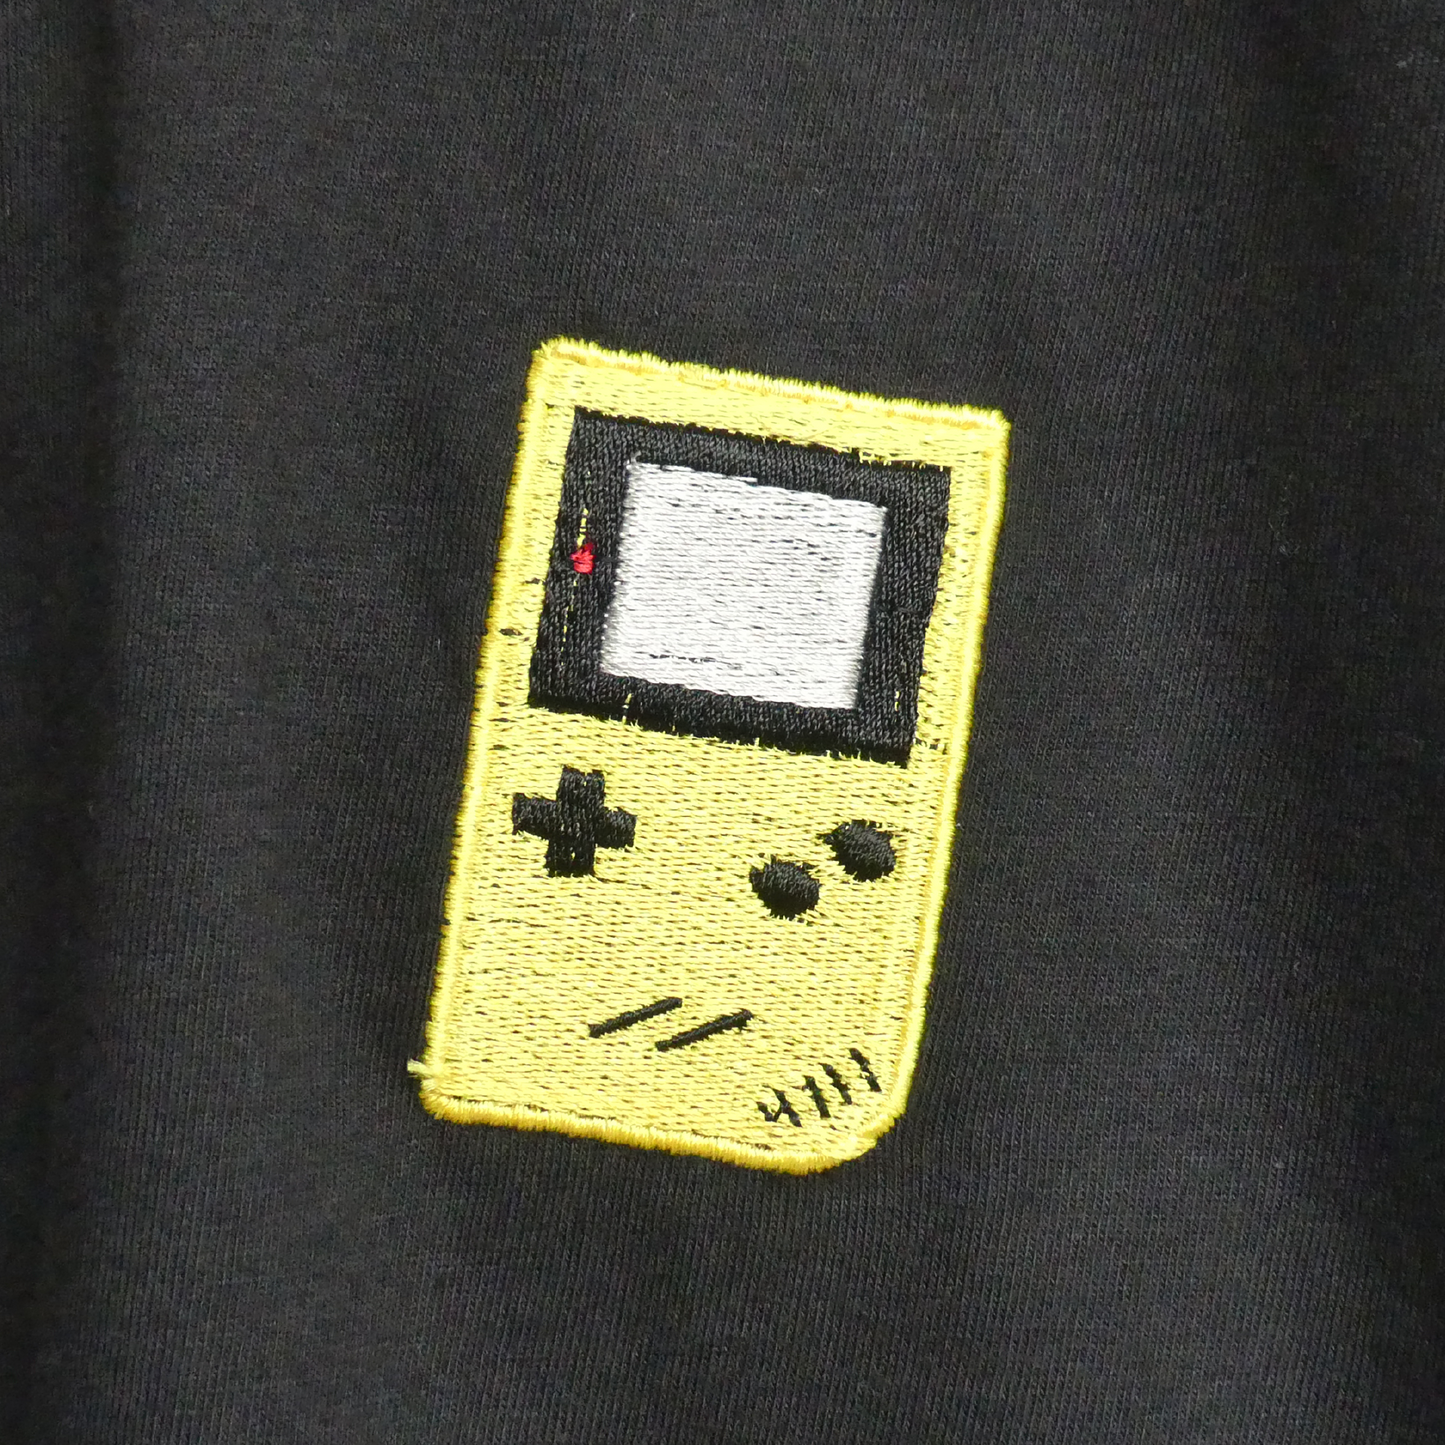 Gameboy Embroidered Black T-shirt